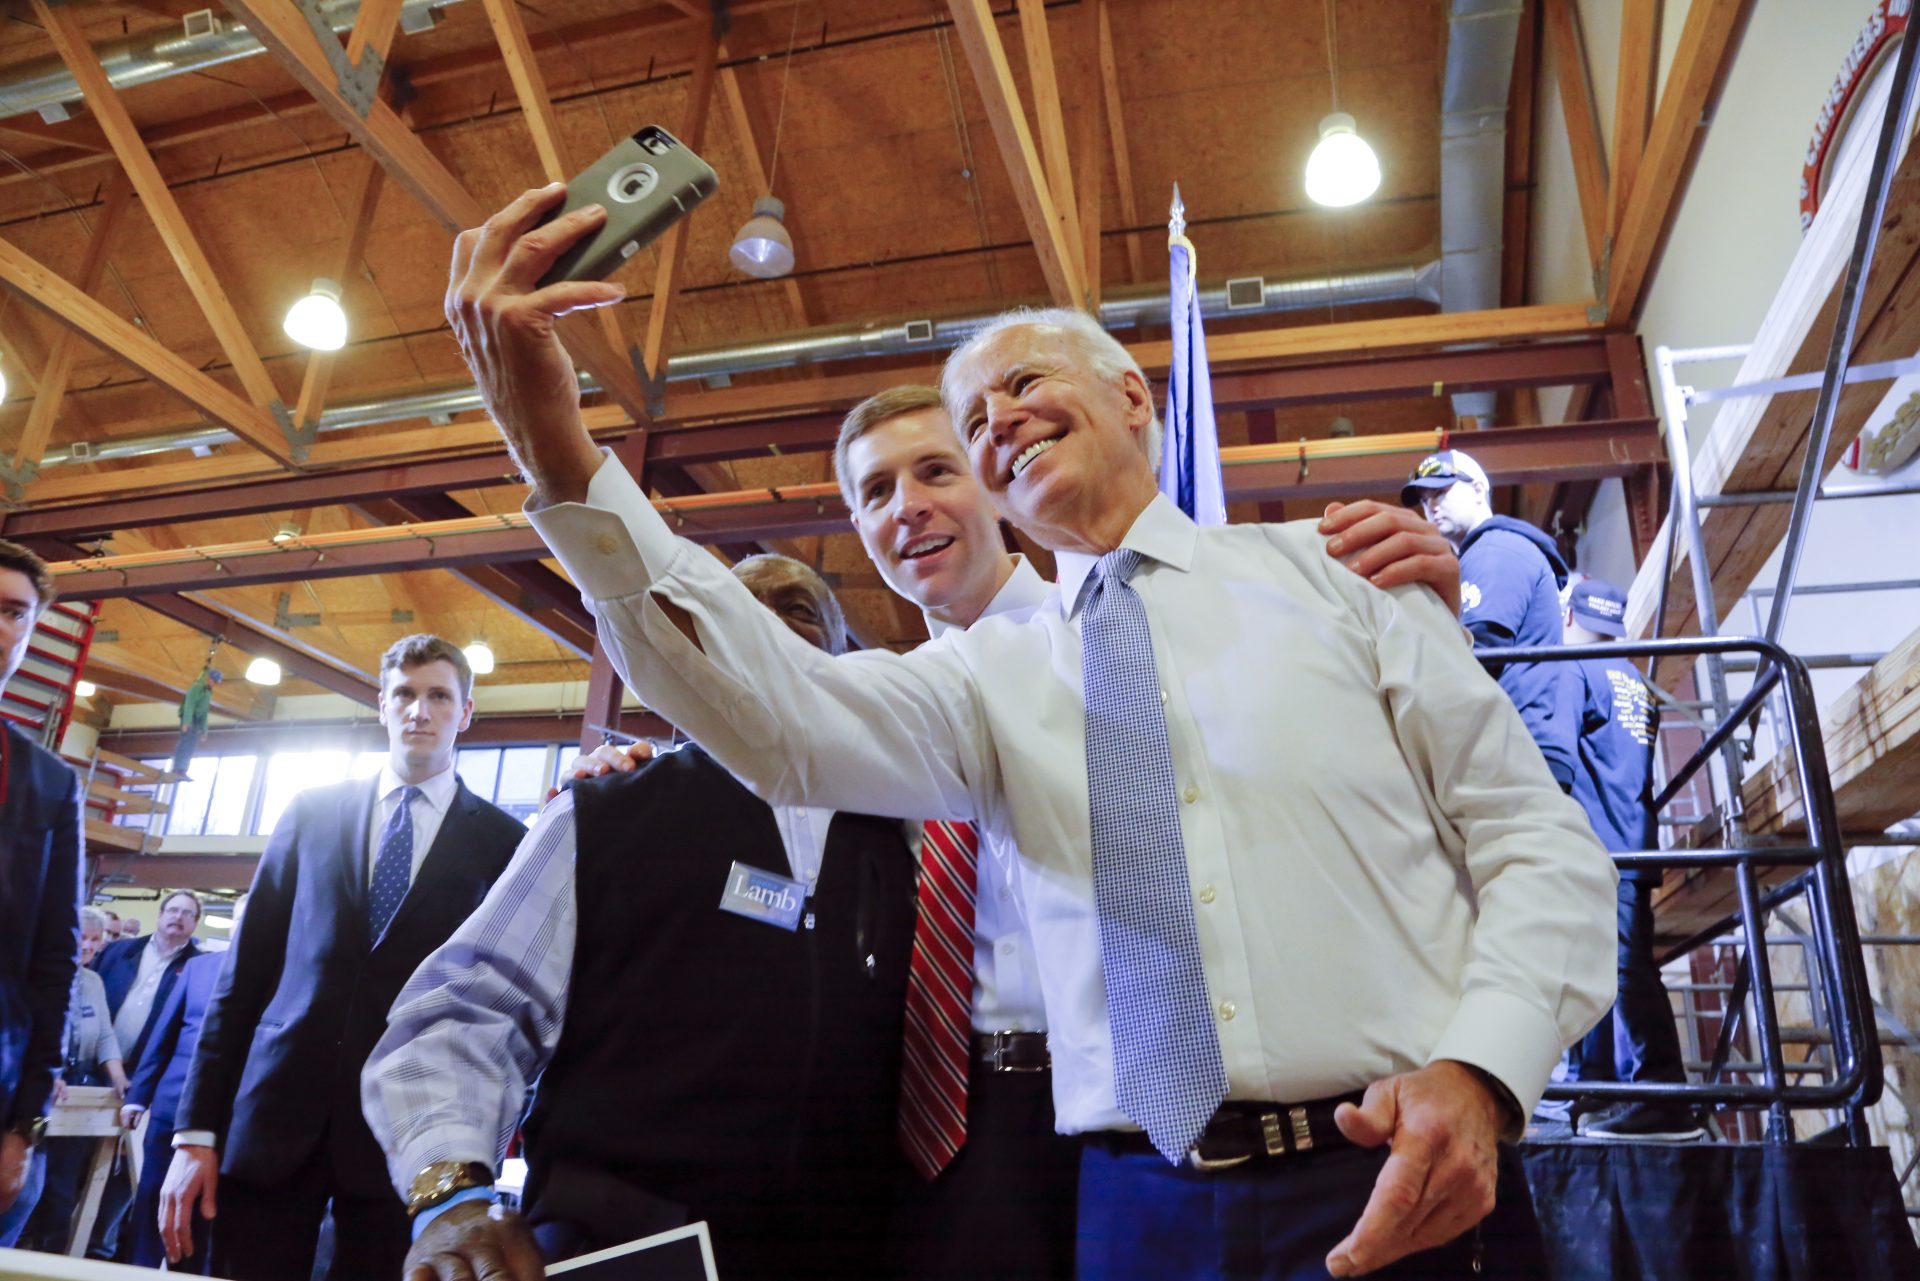 Conor Lamb, center, then a Democratic candidate for the March 13 special election in Pennsylvania's 18th Congressional District, and former Vice President Joe Biden, right, pose for a selfie with a supporter during a rally at the Carpenter's Training Center in Collier, Pa., Tuesday, March 6, 2018.